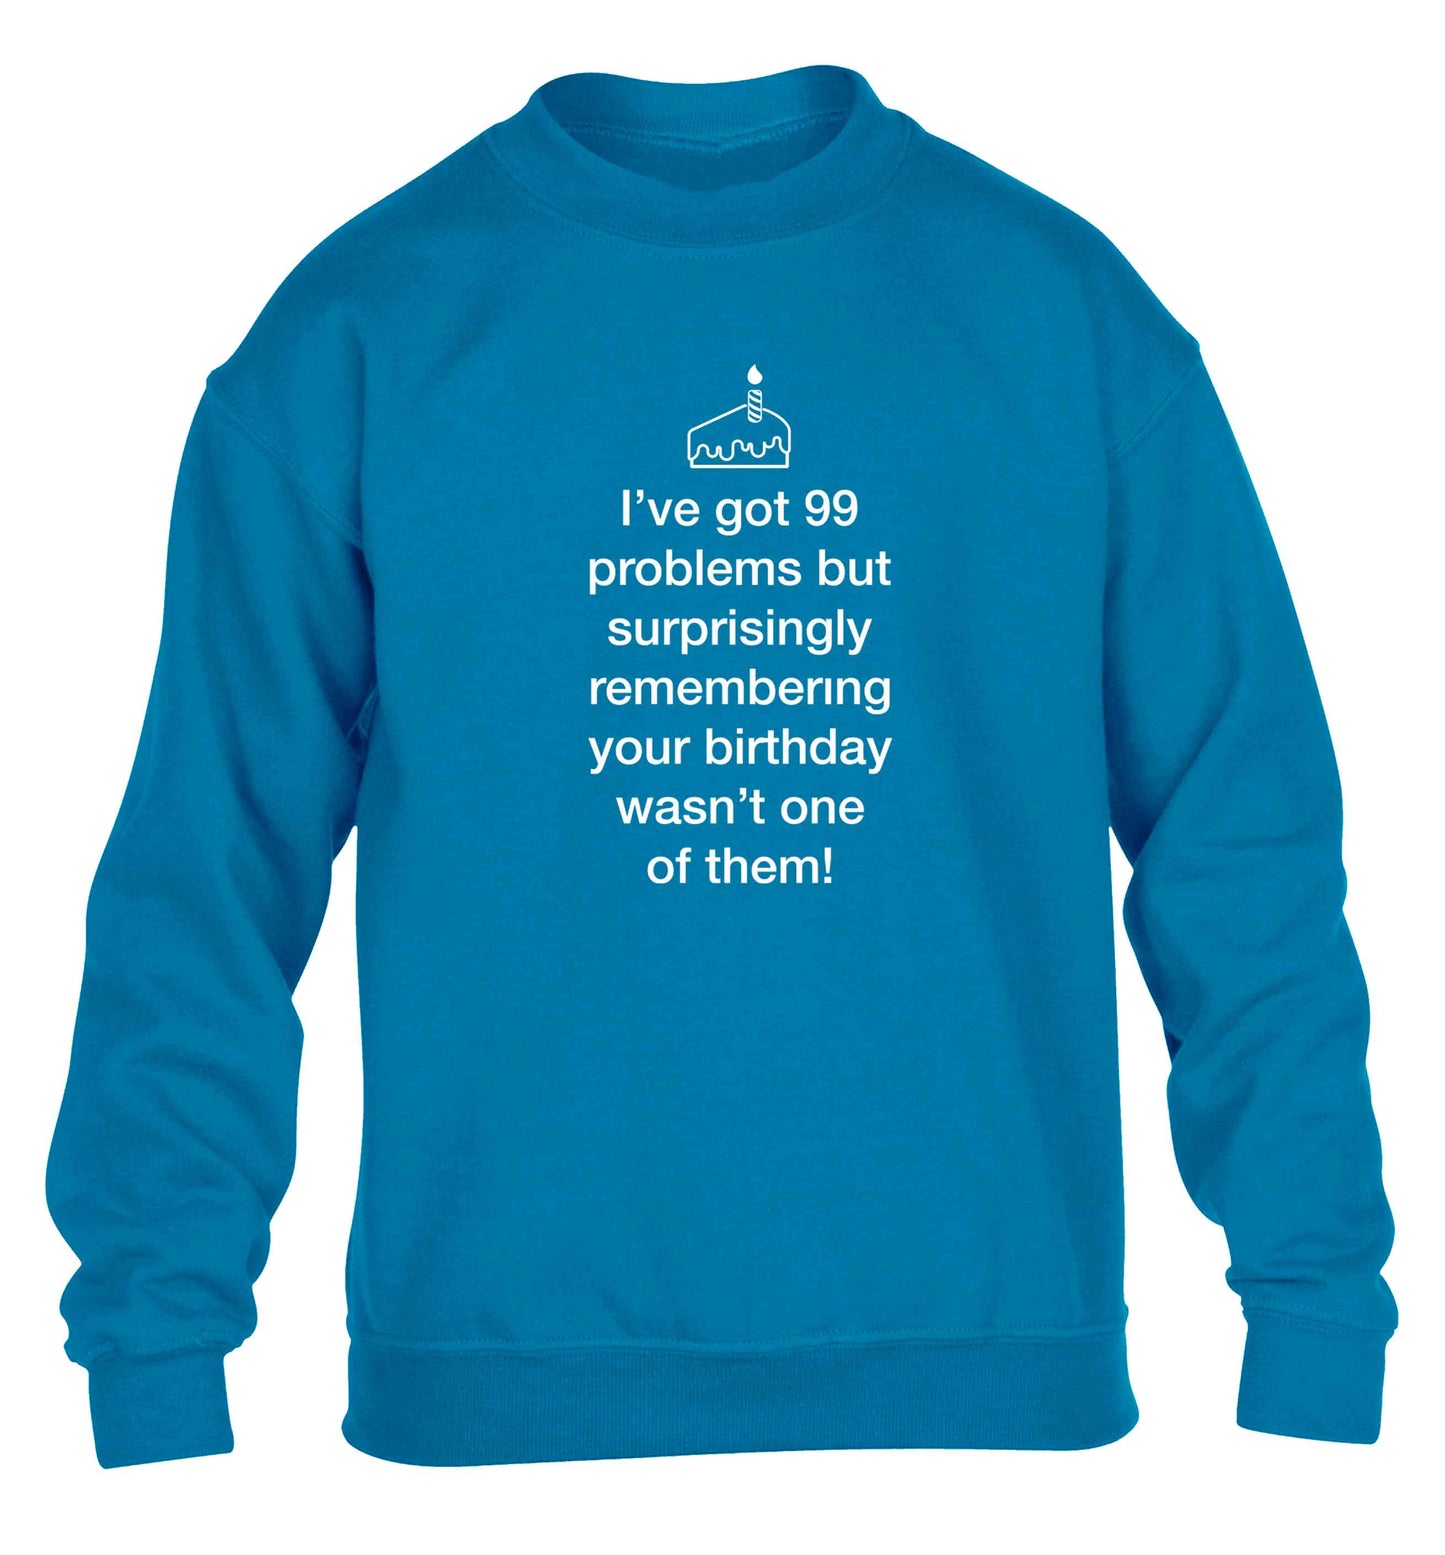 I've got 99 problems but surprisingly remembering your birthday wasn't one of them! children's blue sweater 12-13 Years